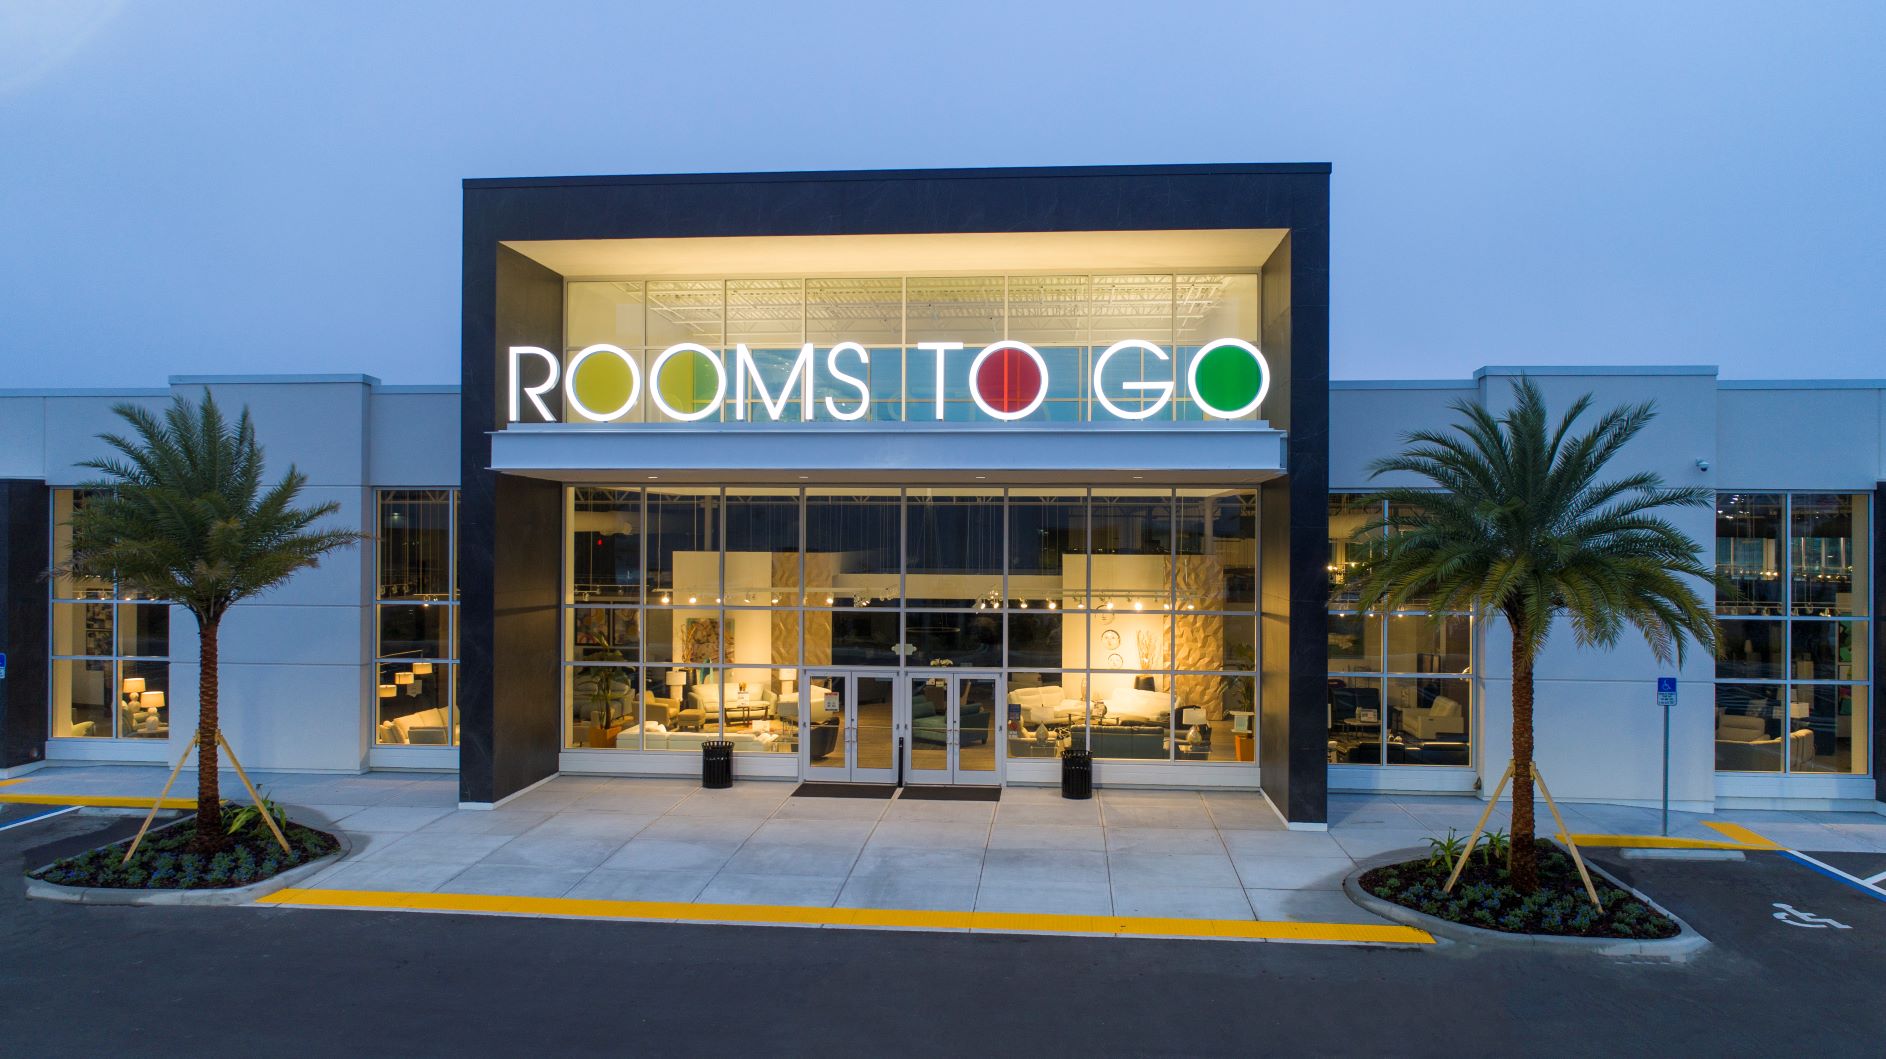 ROOMS TO GO – TAMPA, FL – Clark Electric